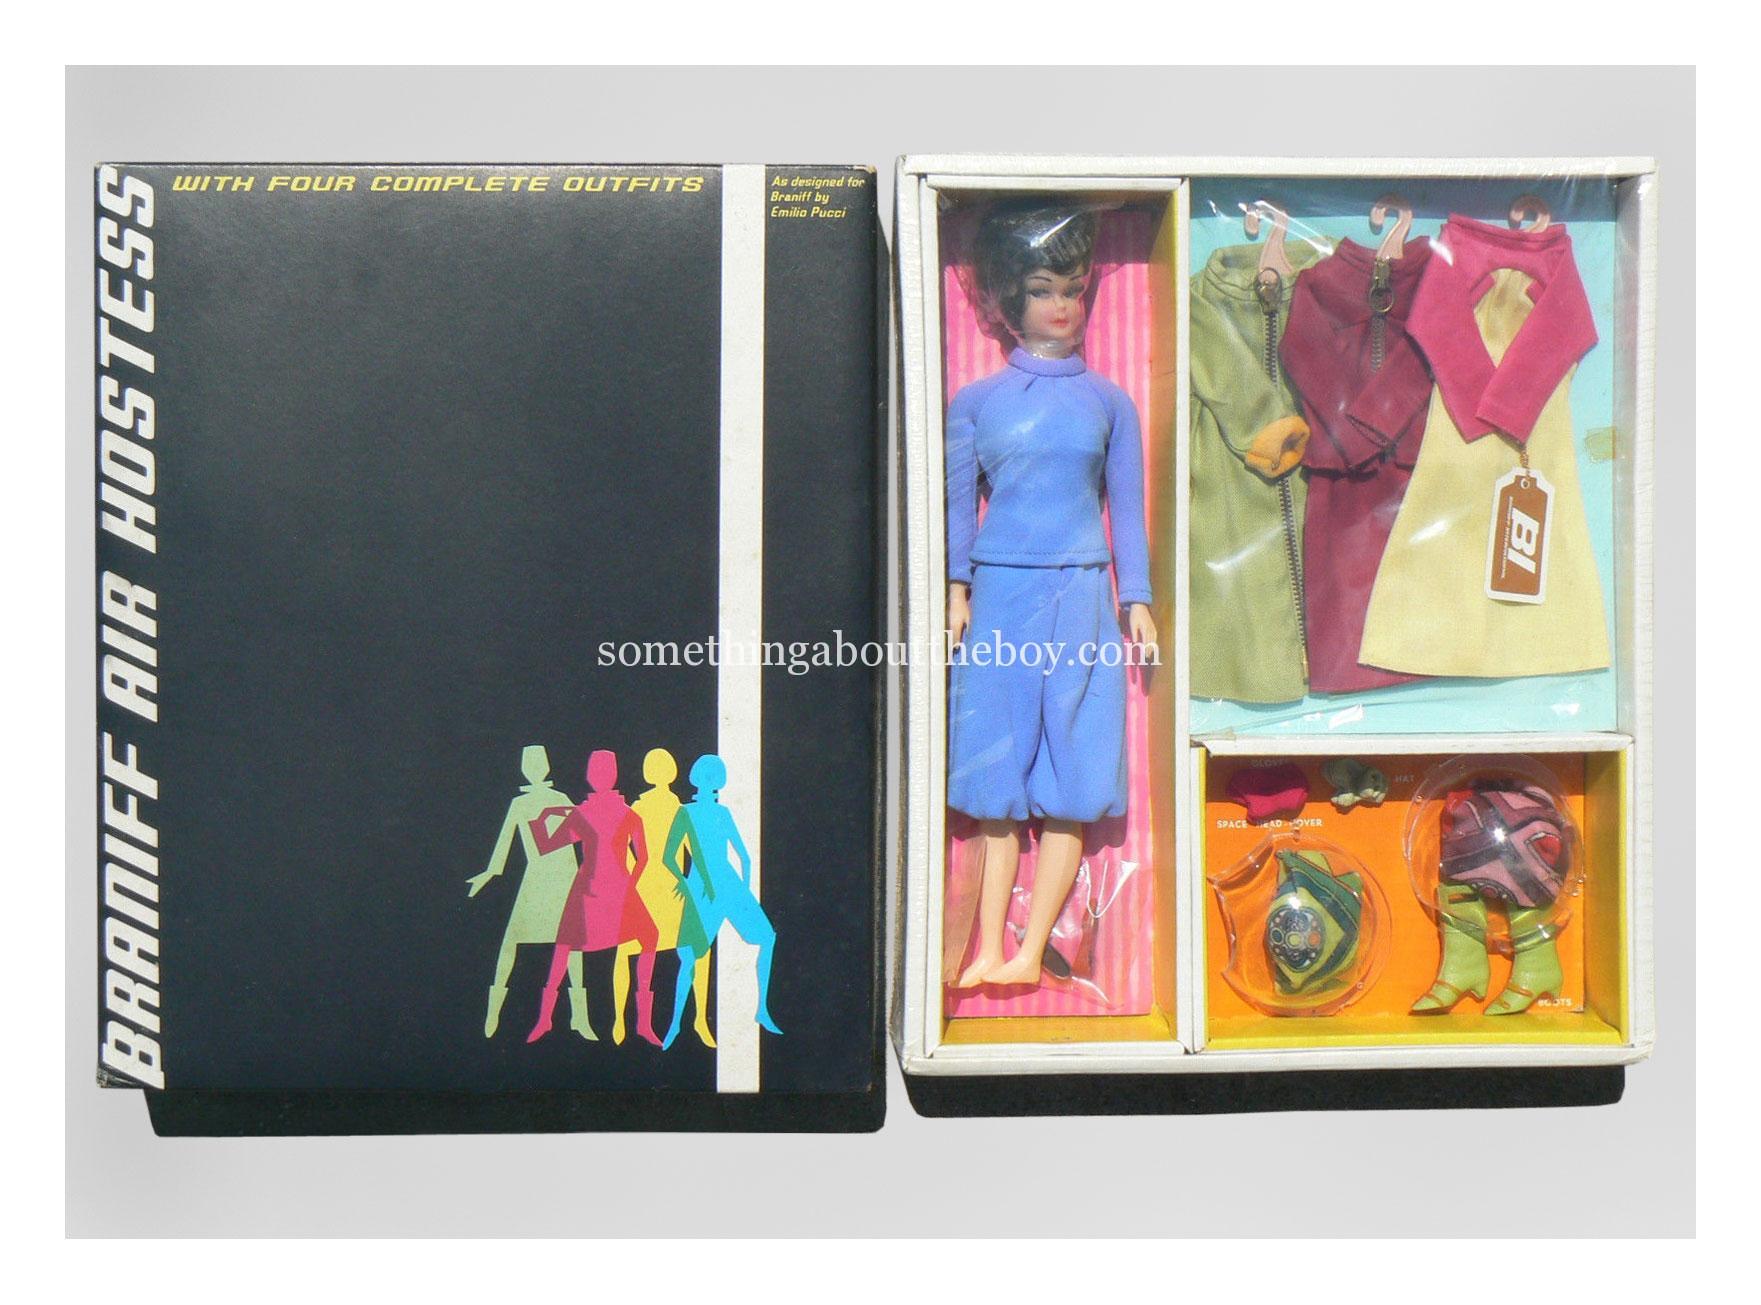 1967 Braniff Air Hostess box set with four complete outfits by Marx Toys